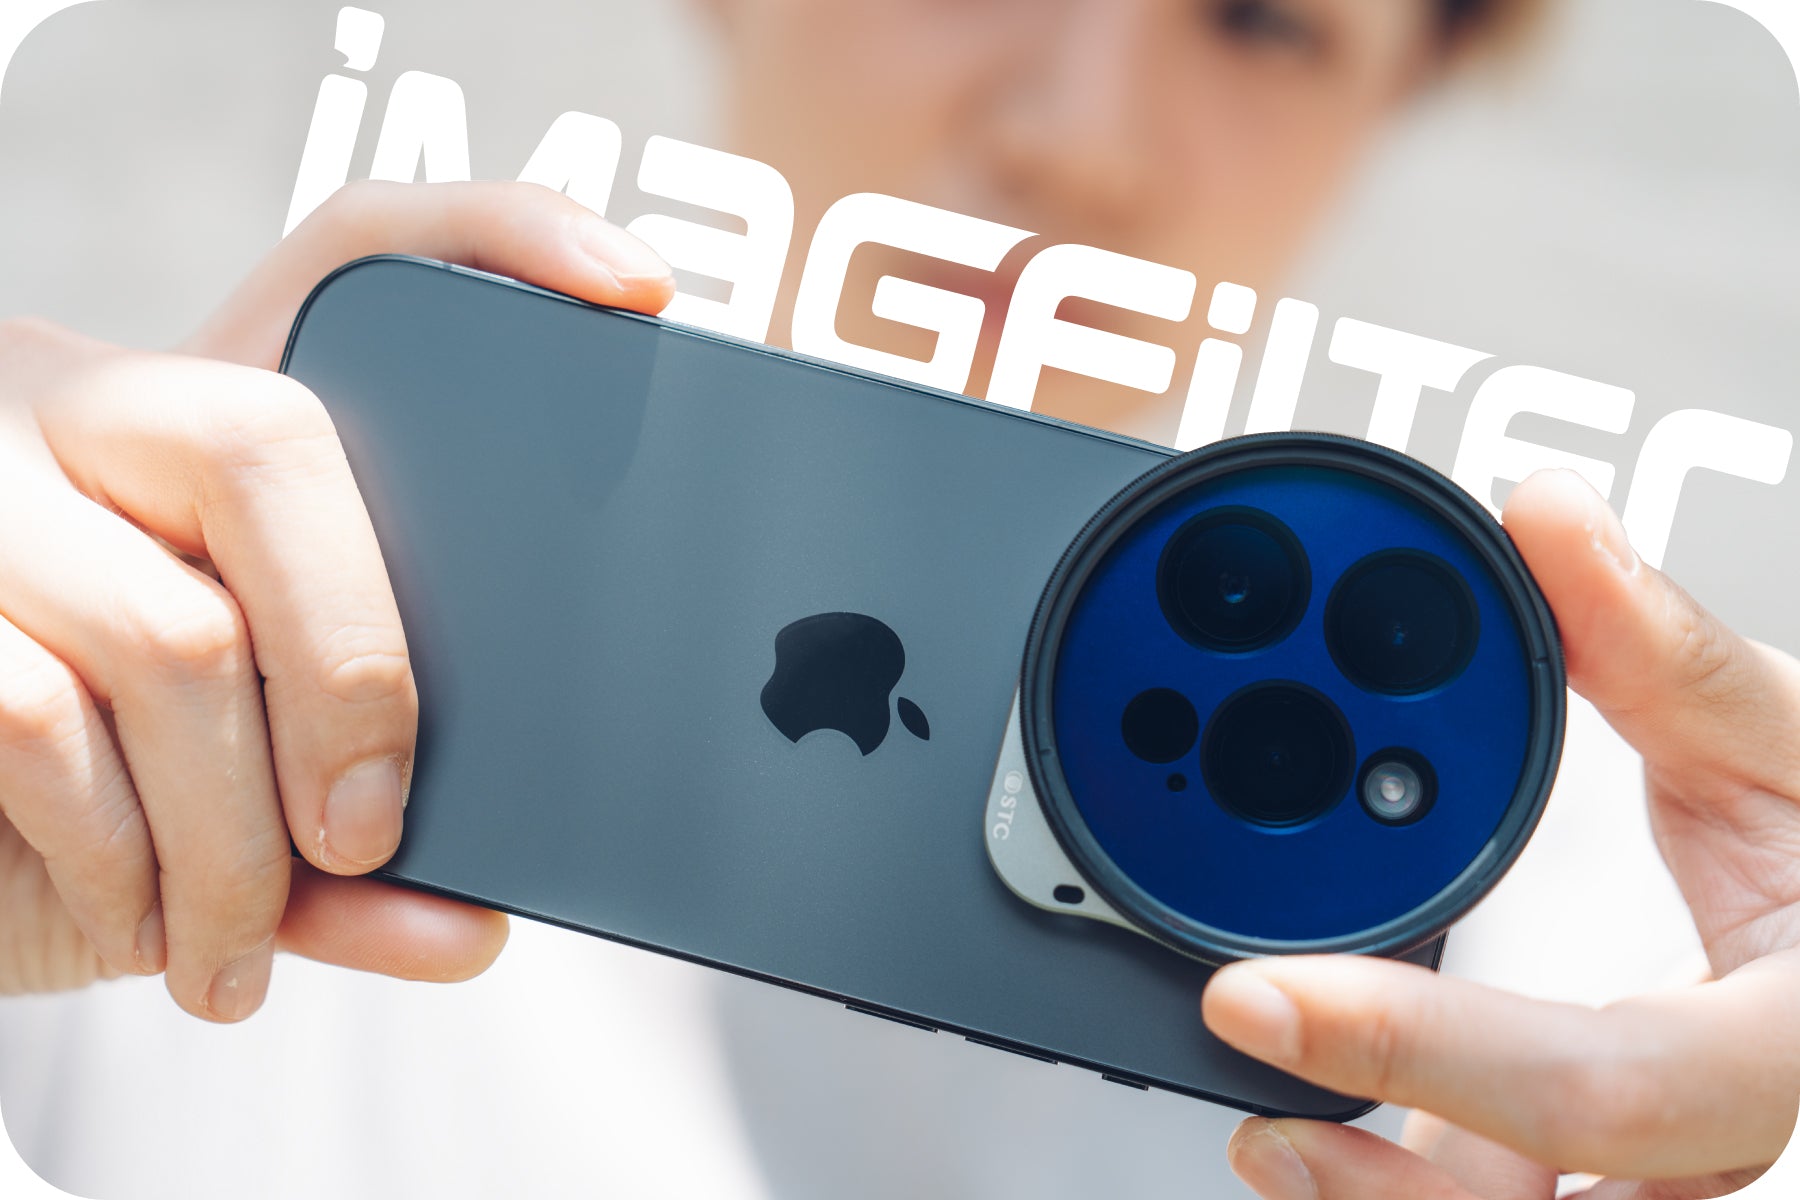 iMagFiltet手機磁吸濾鏡for iPhone